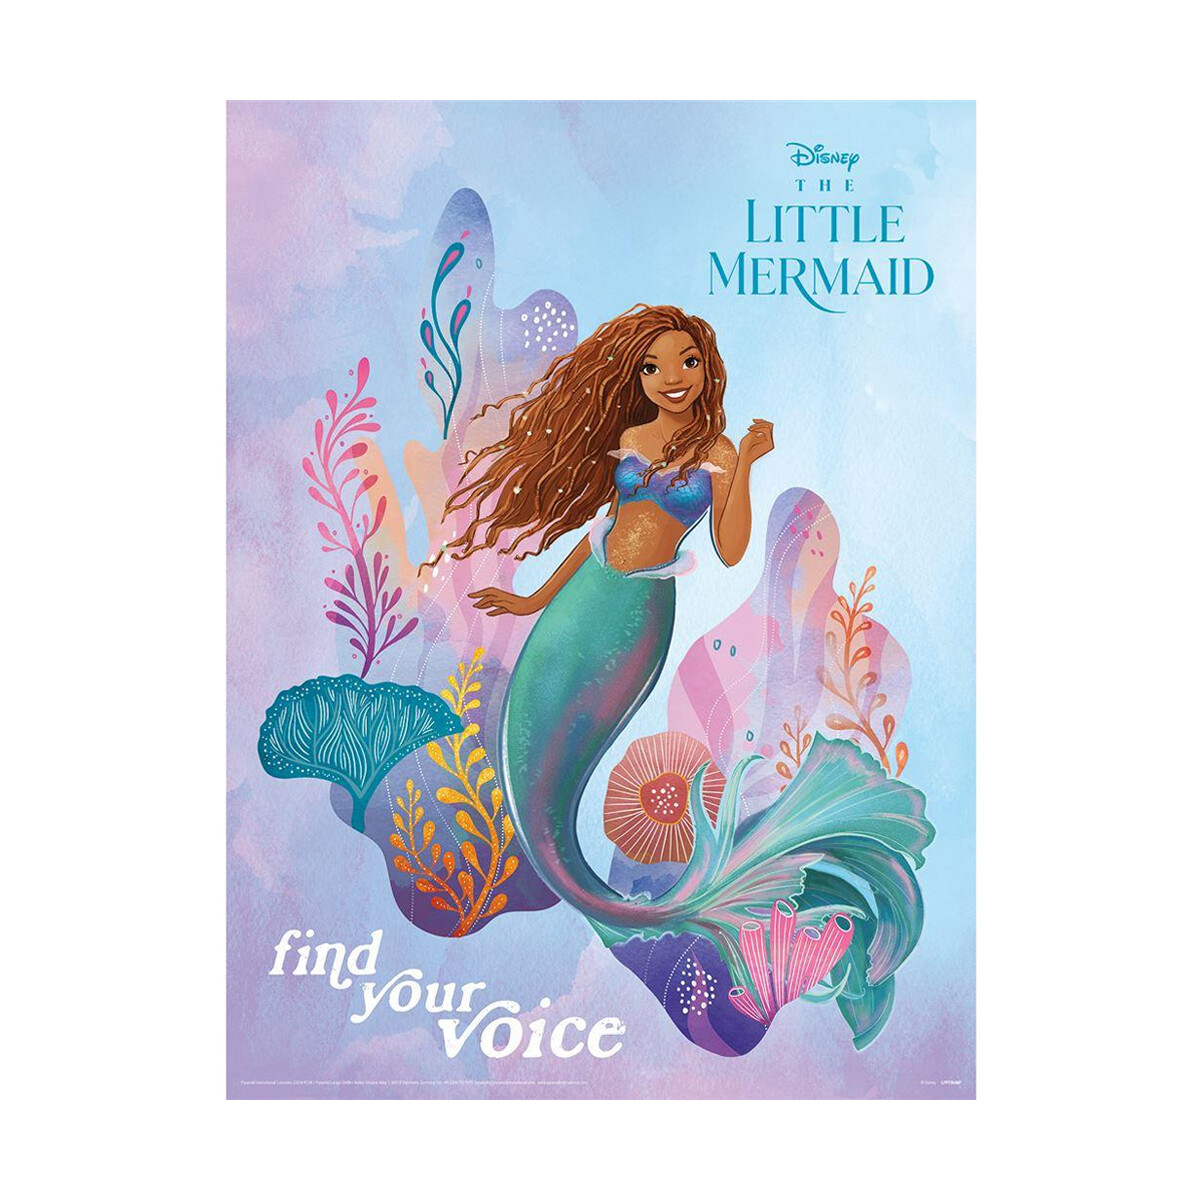 Casa Afiches / posters The Little Mermaid PM6506 Multicolor